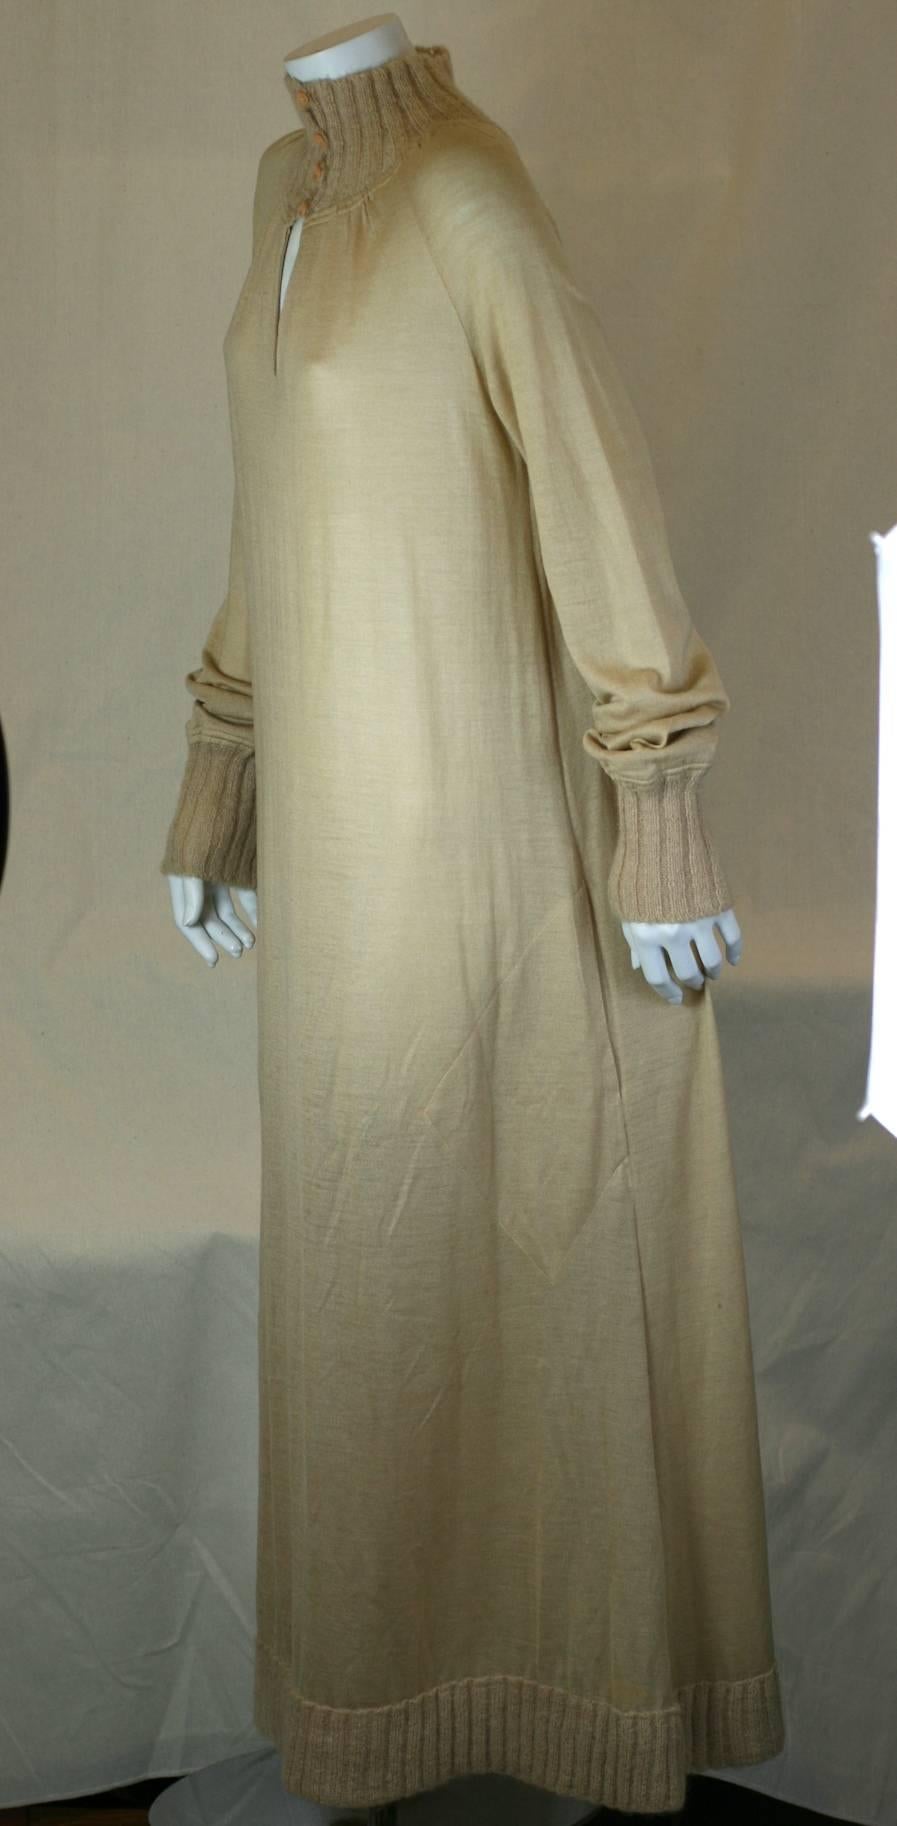 Long Sweater Knit Dress, Marc D'Alcy, Paris. Lightweight, wheat wool jersey knit with the contrast of wide and chunky mohair rib knit trim on the collar, wrists and hem. Great exaggerated maxi length. Side pockets. Easy to wear and great belted as